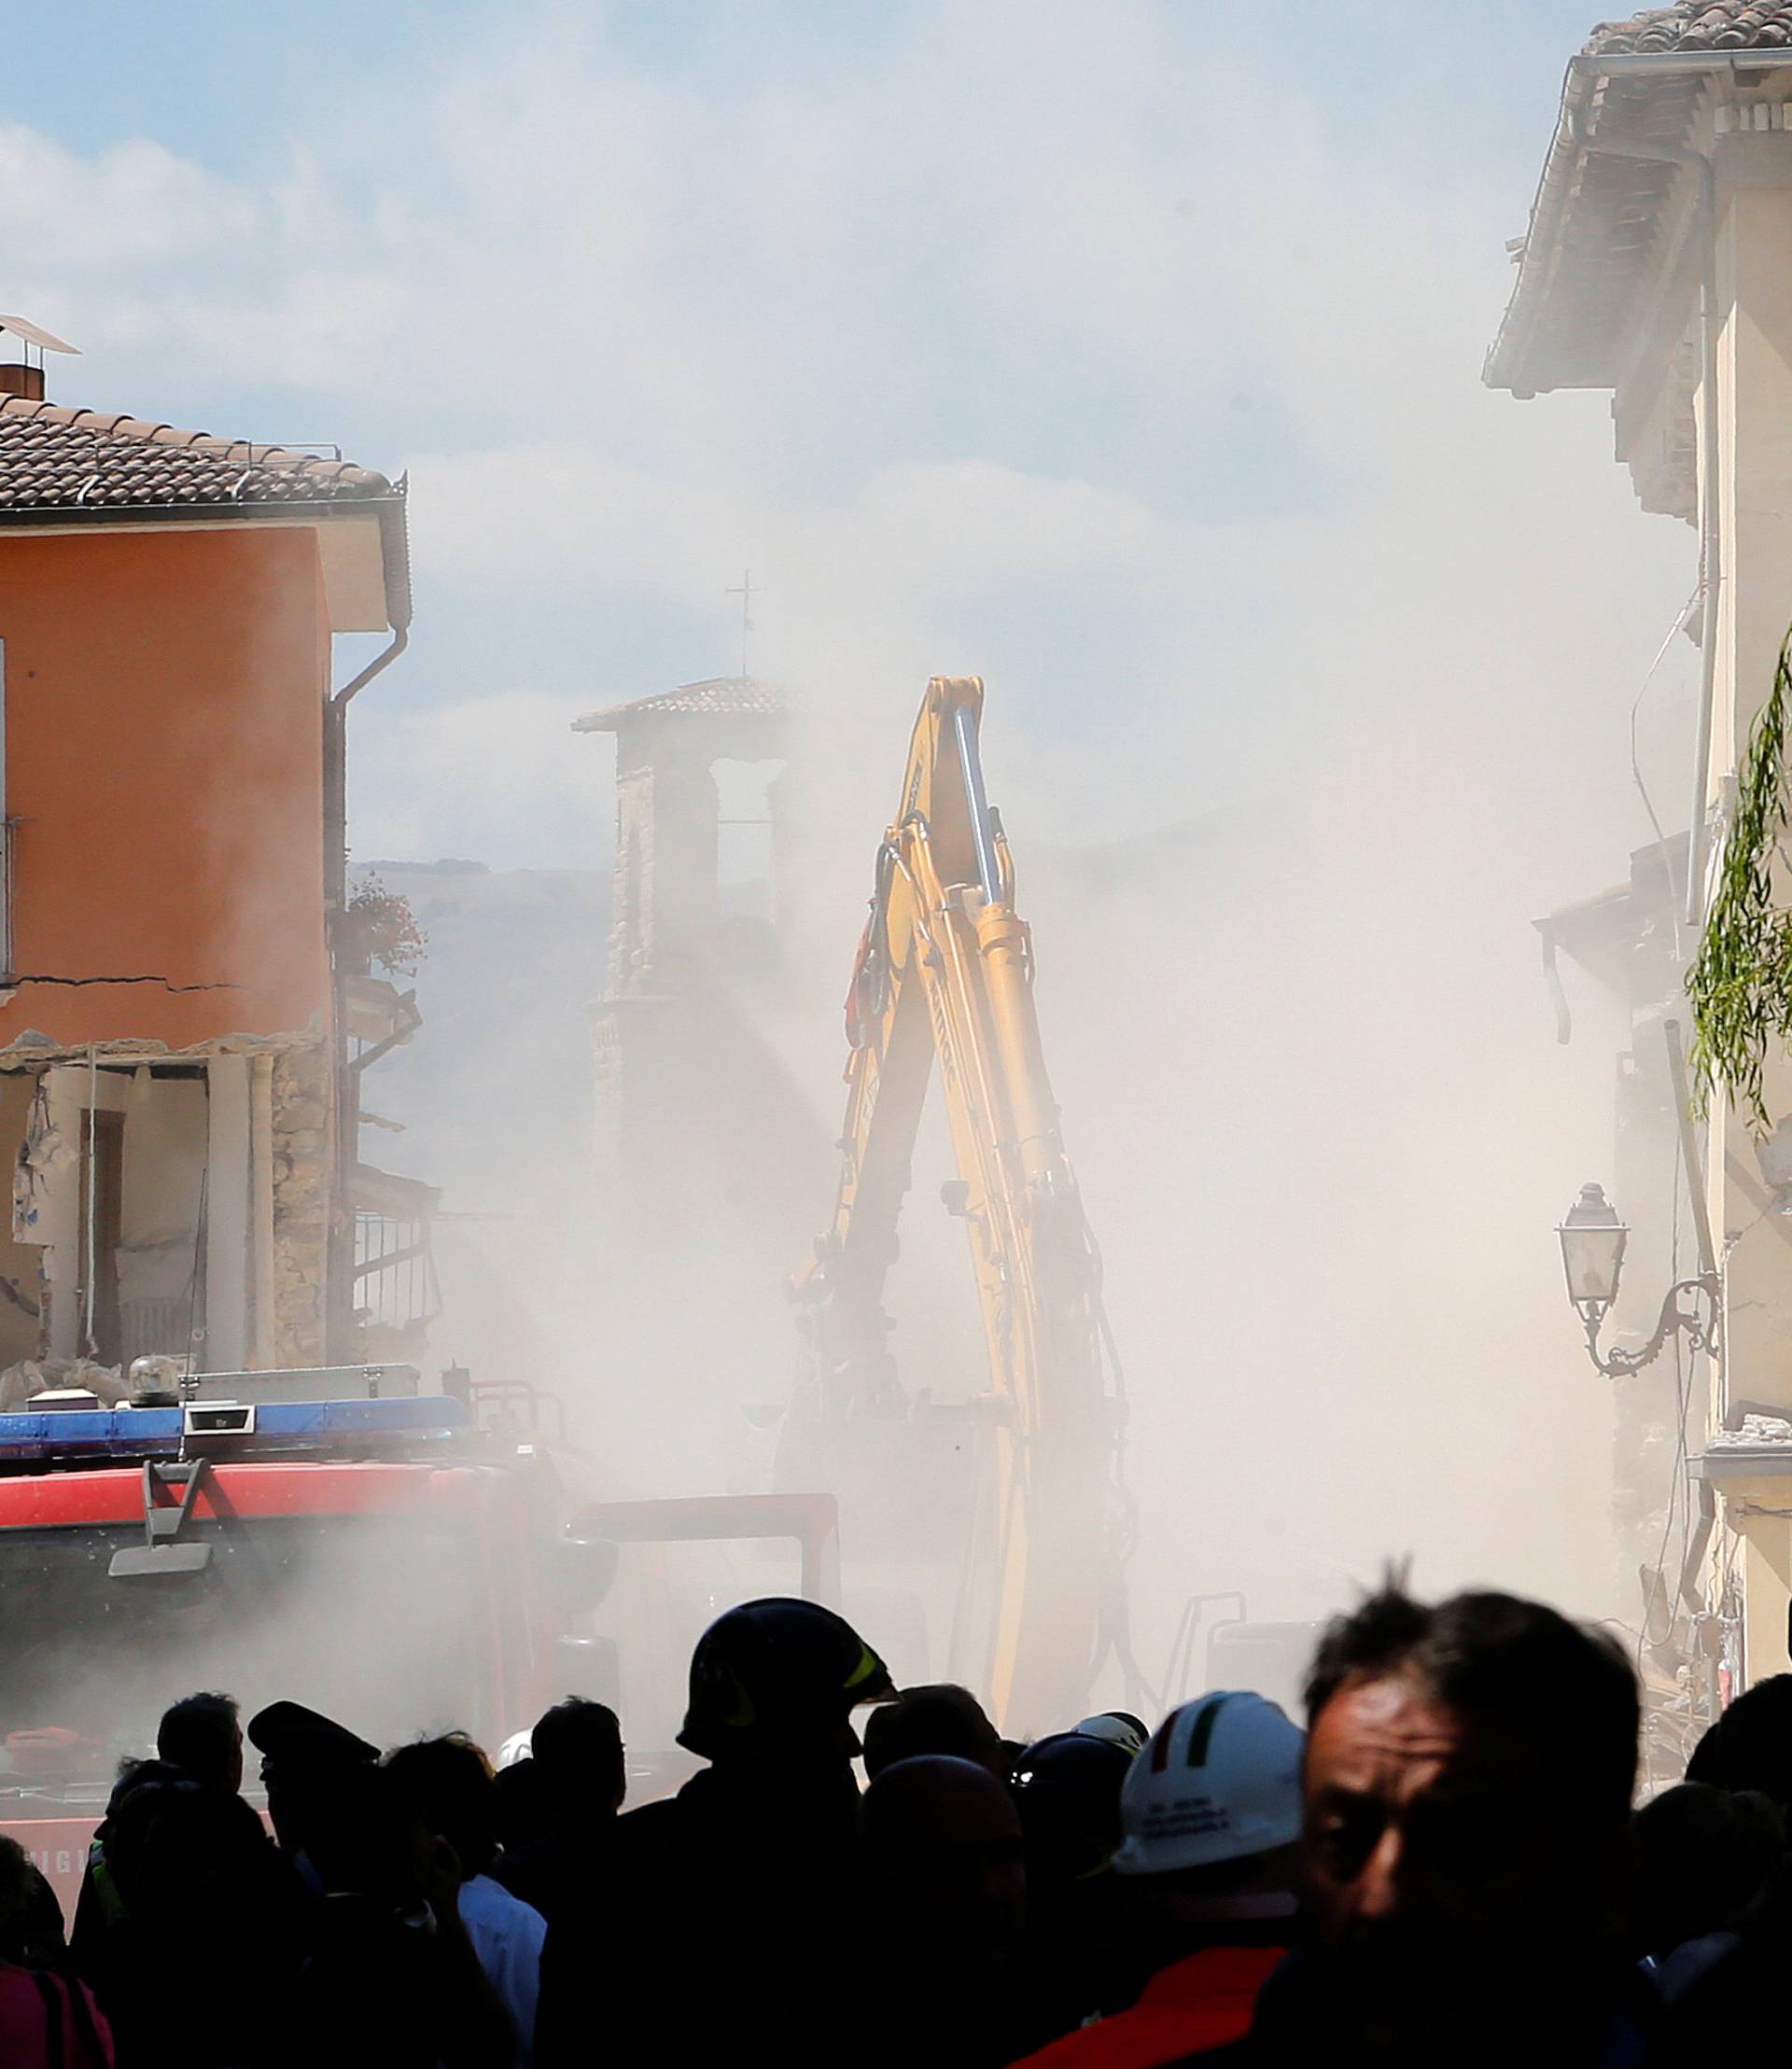 Dust is seen coming out from falling rubble following an aftershock in Amatrice